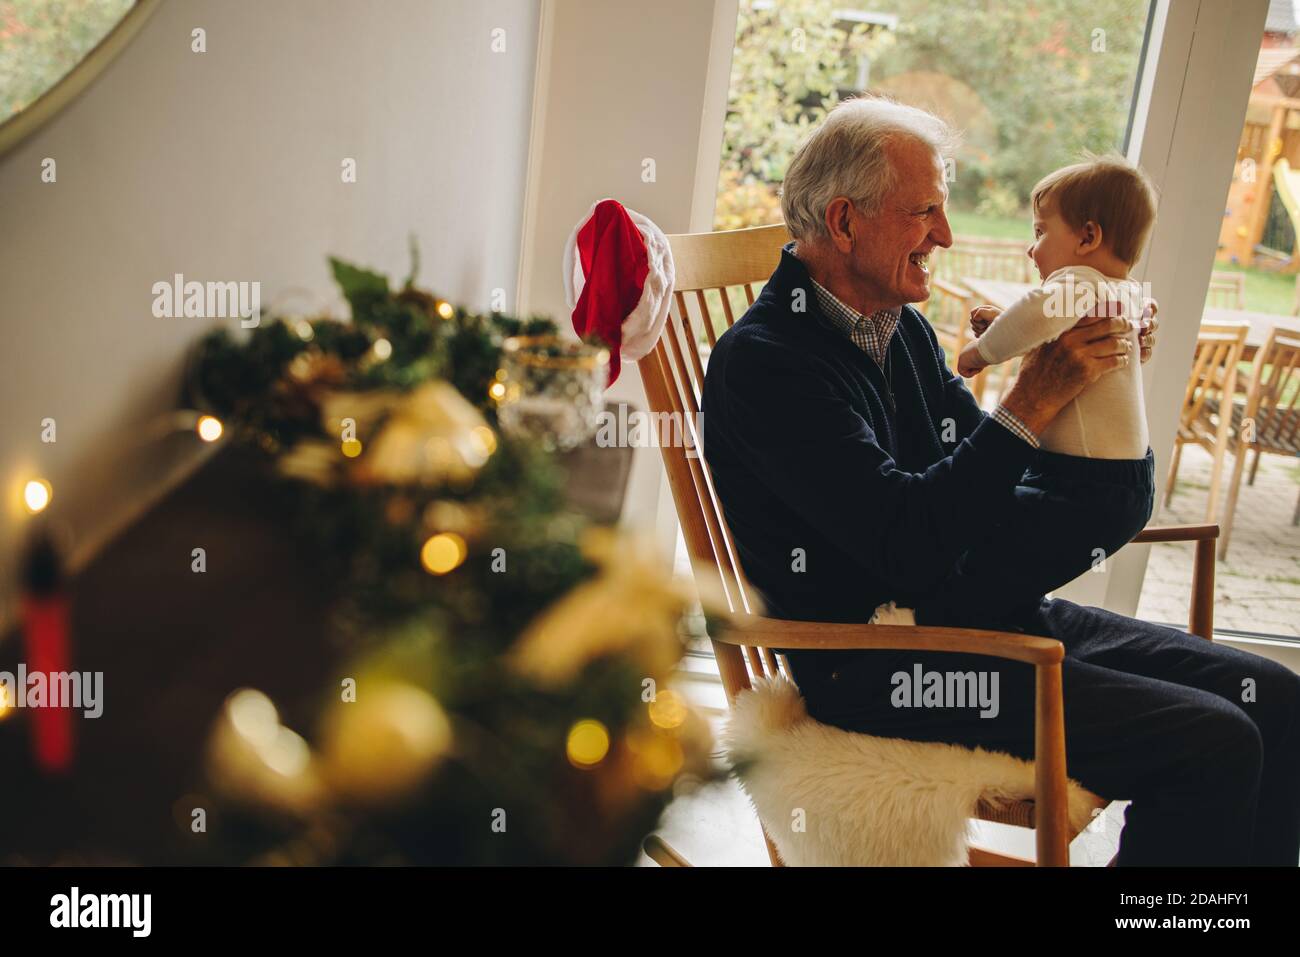 Elderly man with his grandson on a christmas eve. Grandfather holding his grandson sitting on chair. Stock Photo